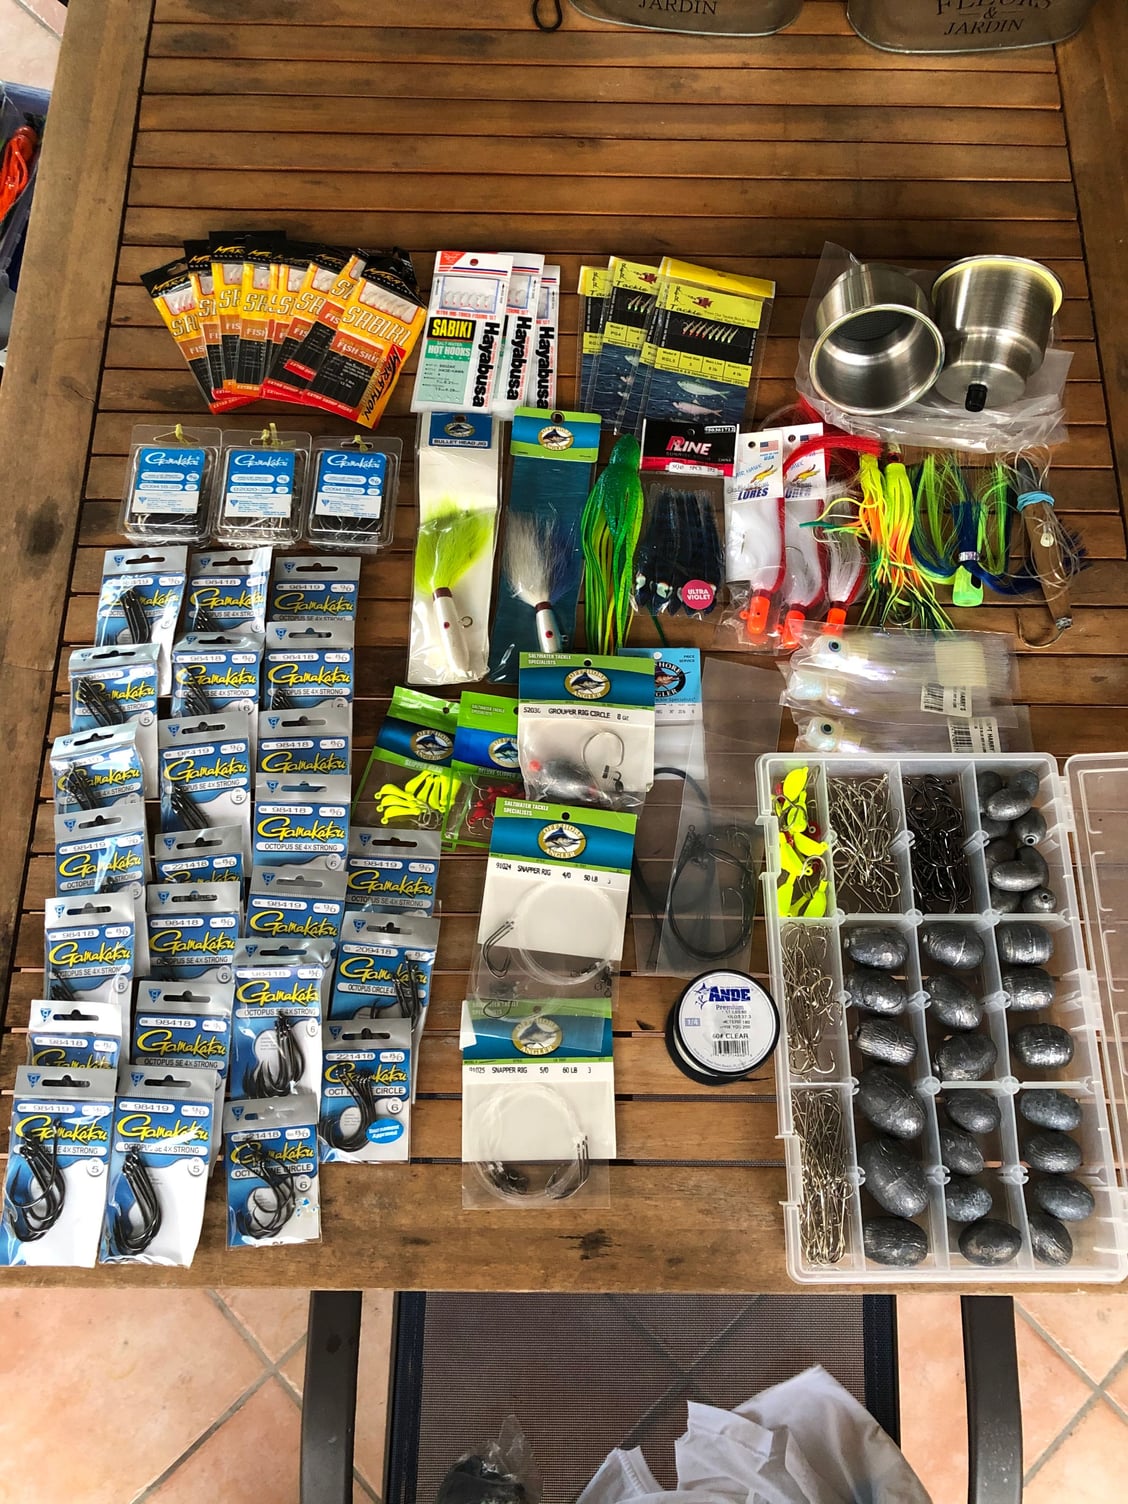 SOLD) Bulk Fishing Tackle for cheap (SOLD) - The Hull Truth - Boating and  Fishing Forum